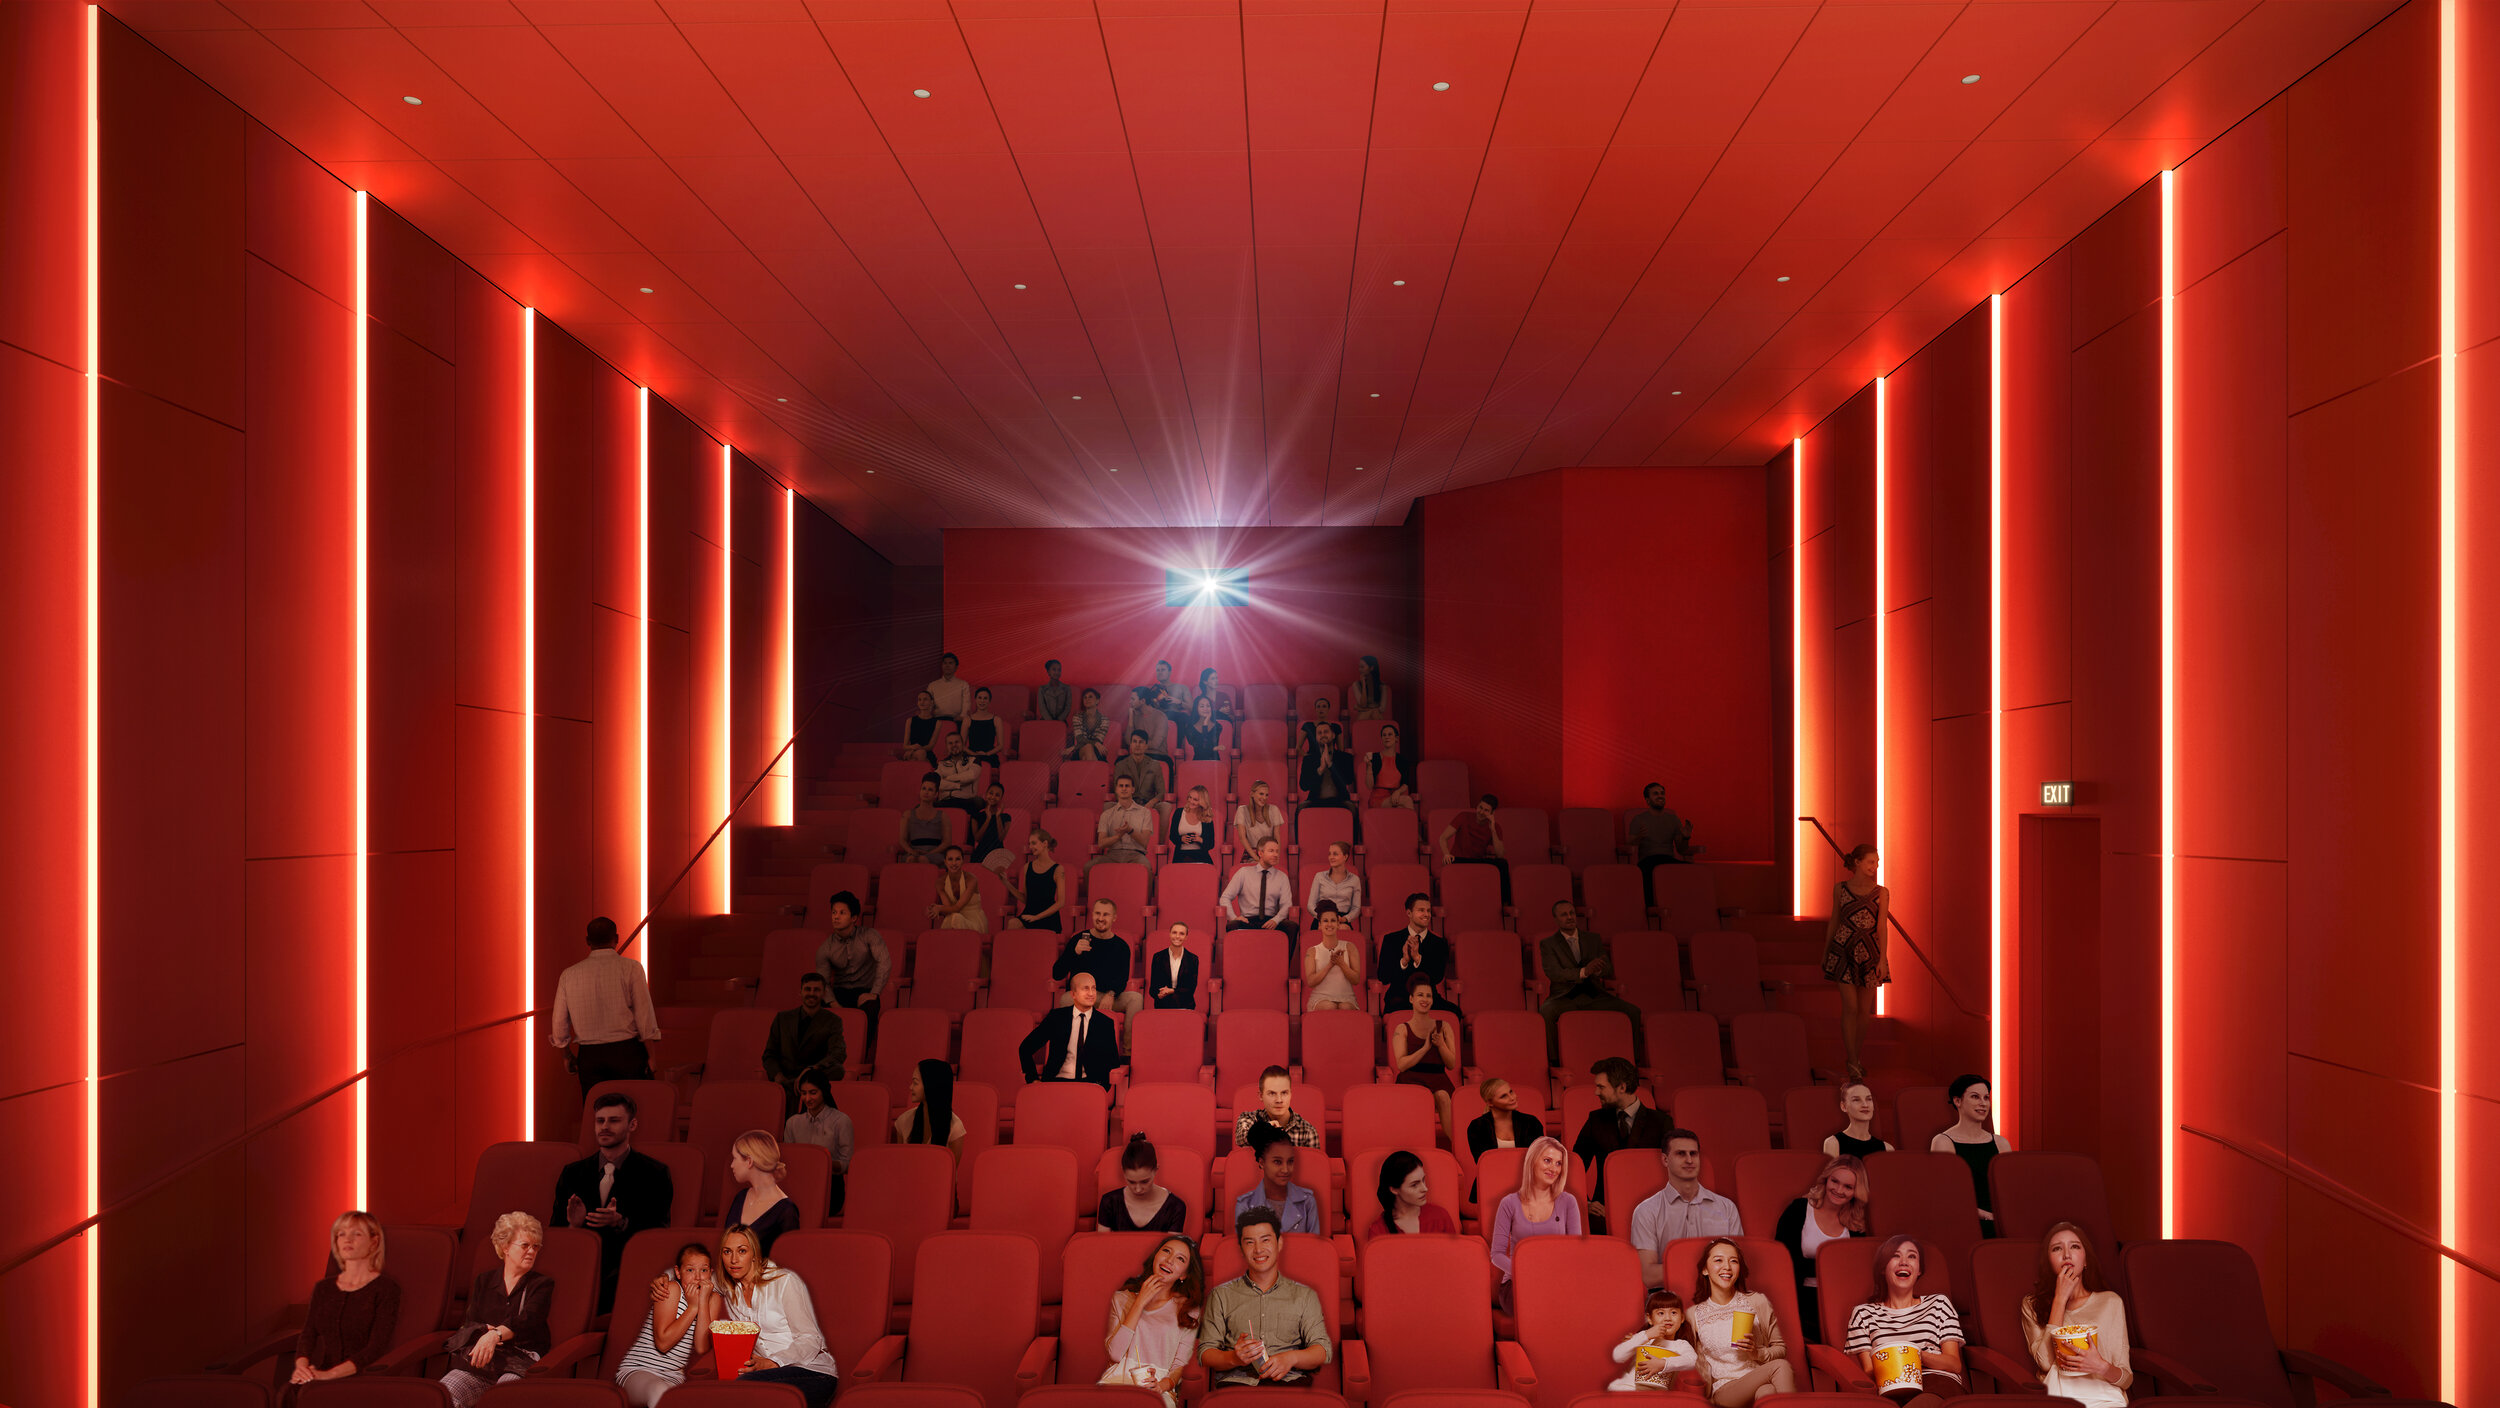 Moviehouse 5, a new, state-of-the-art 149-seat cinema for first-run films and special events